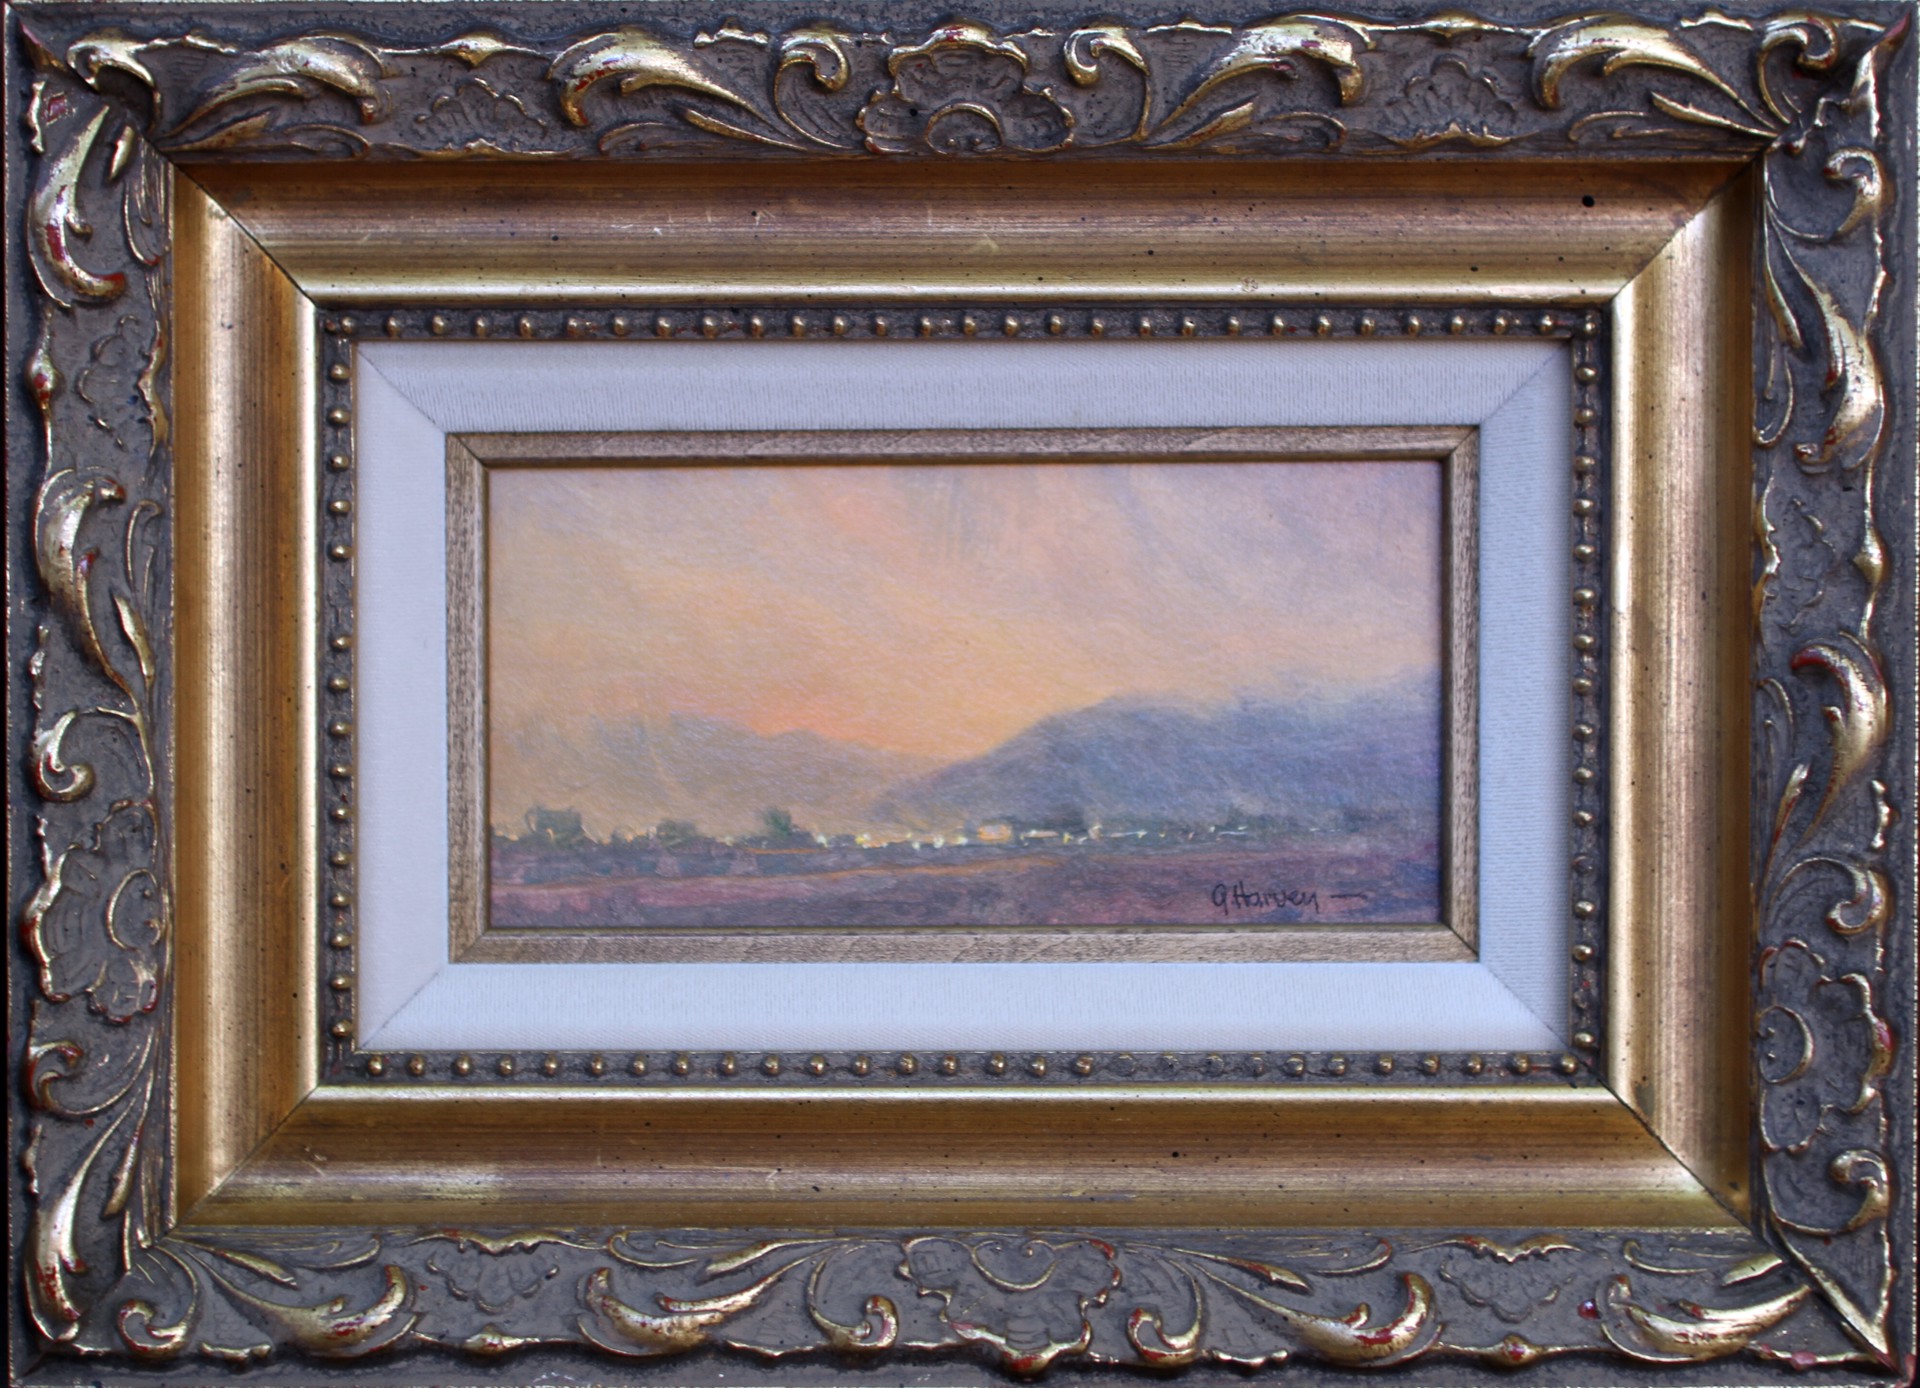 Sunset Landscape-Directly from G. Harvey Estate, Hung in his home by G. Harvey